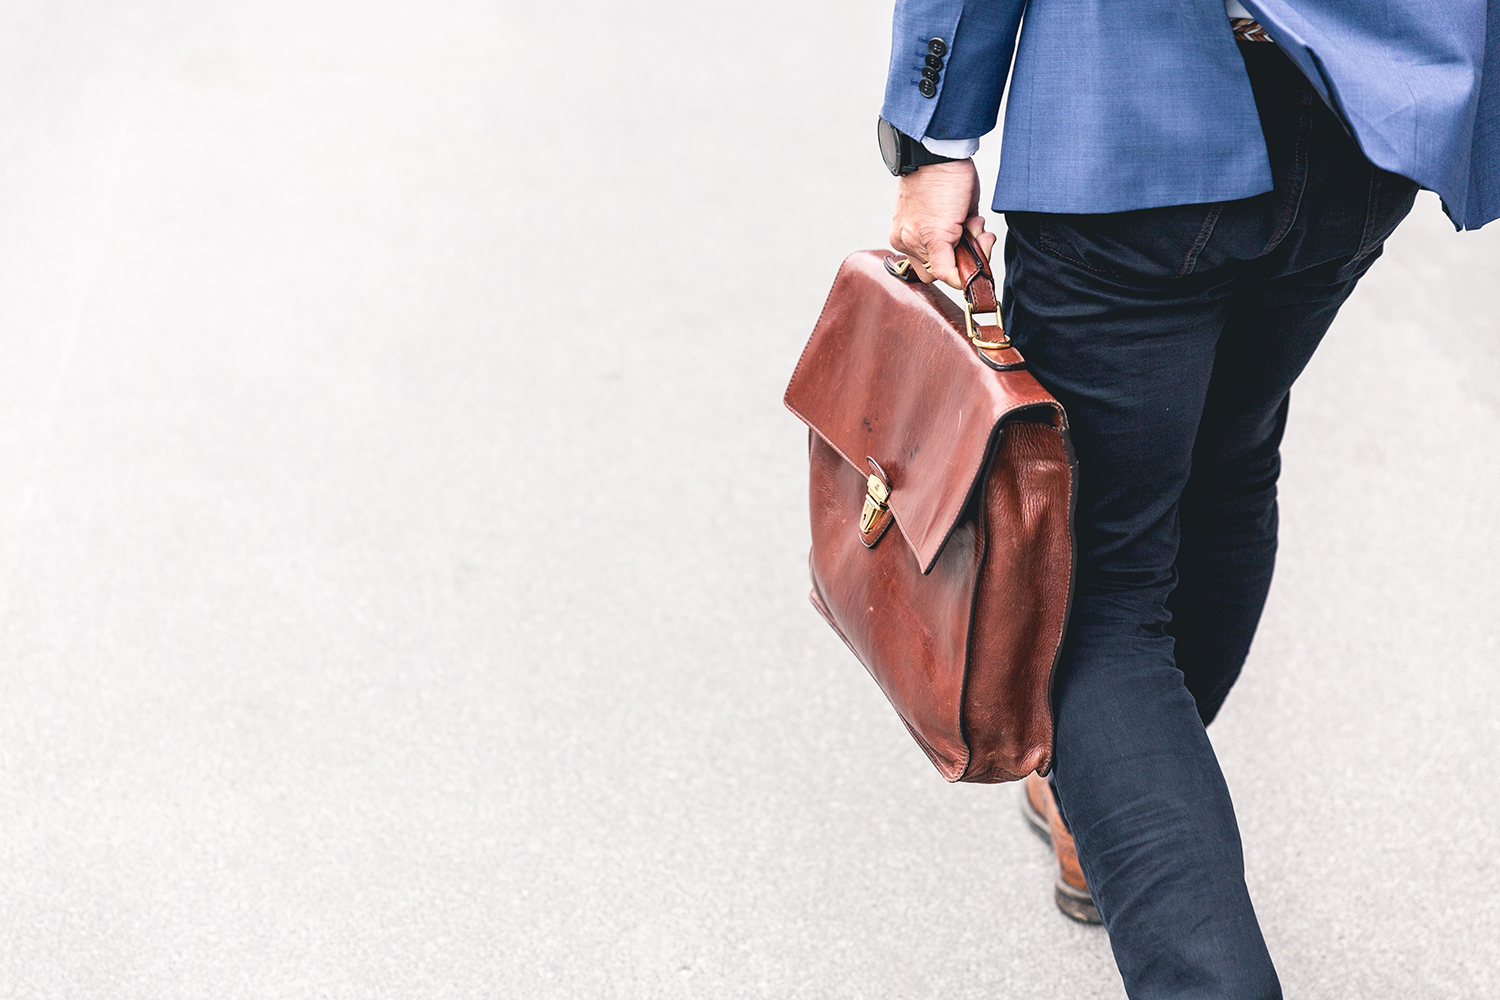 Russell-Cooke employment litigation charging information. Man walking and carrying a brown leather work bag. 